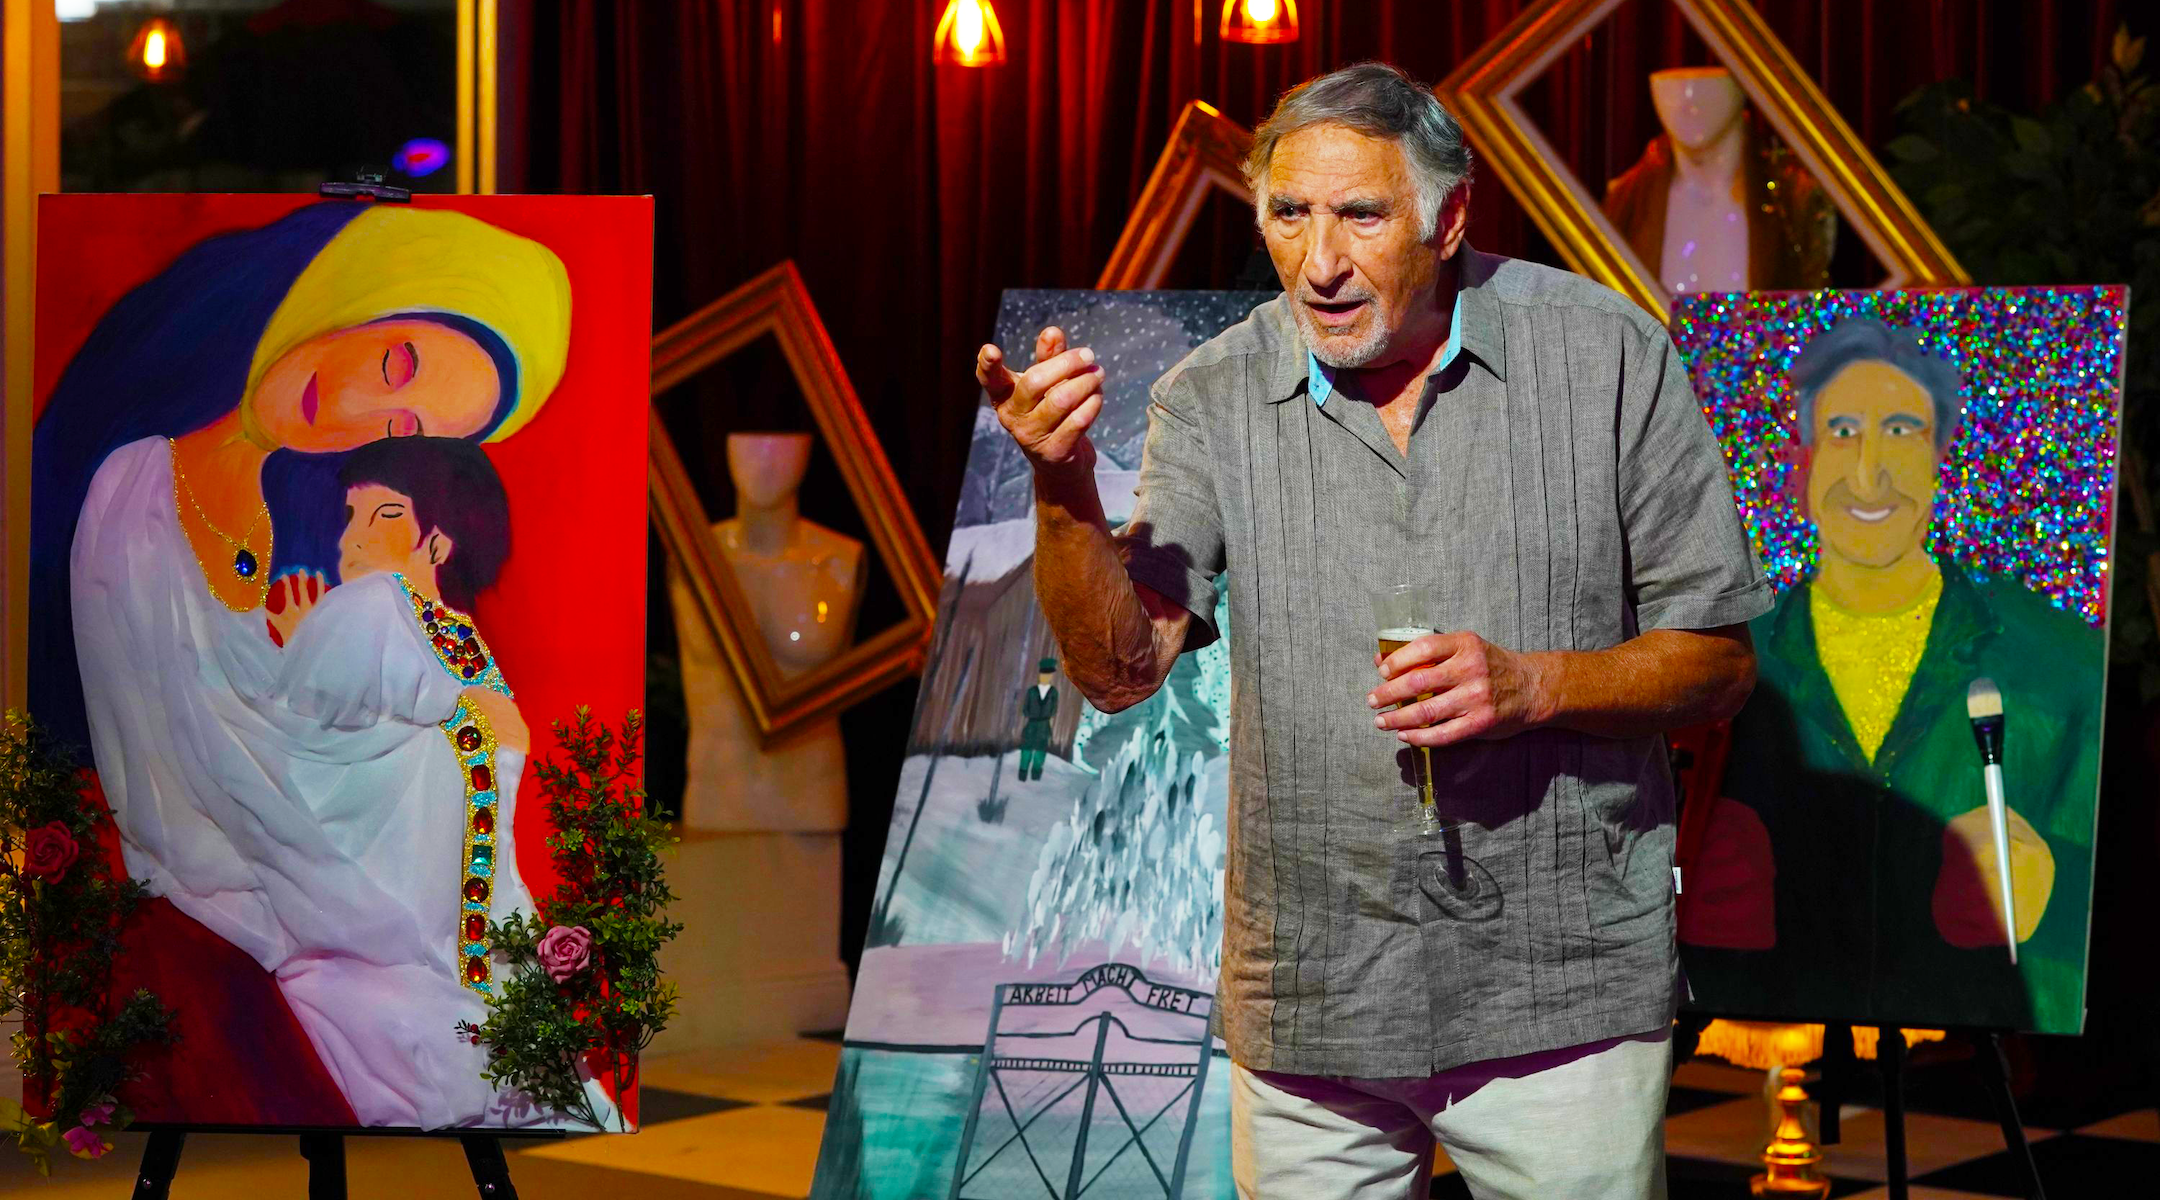 Judd Hirsch plays a Holocaust survivor in “iMordecai.” (FeMor Productions)